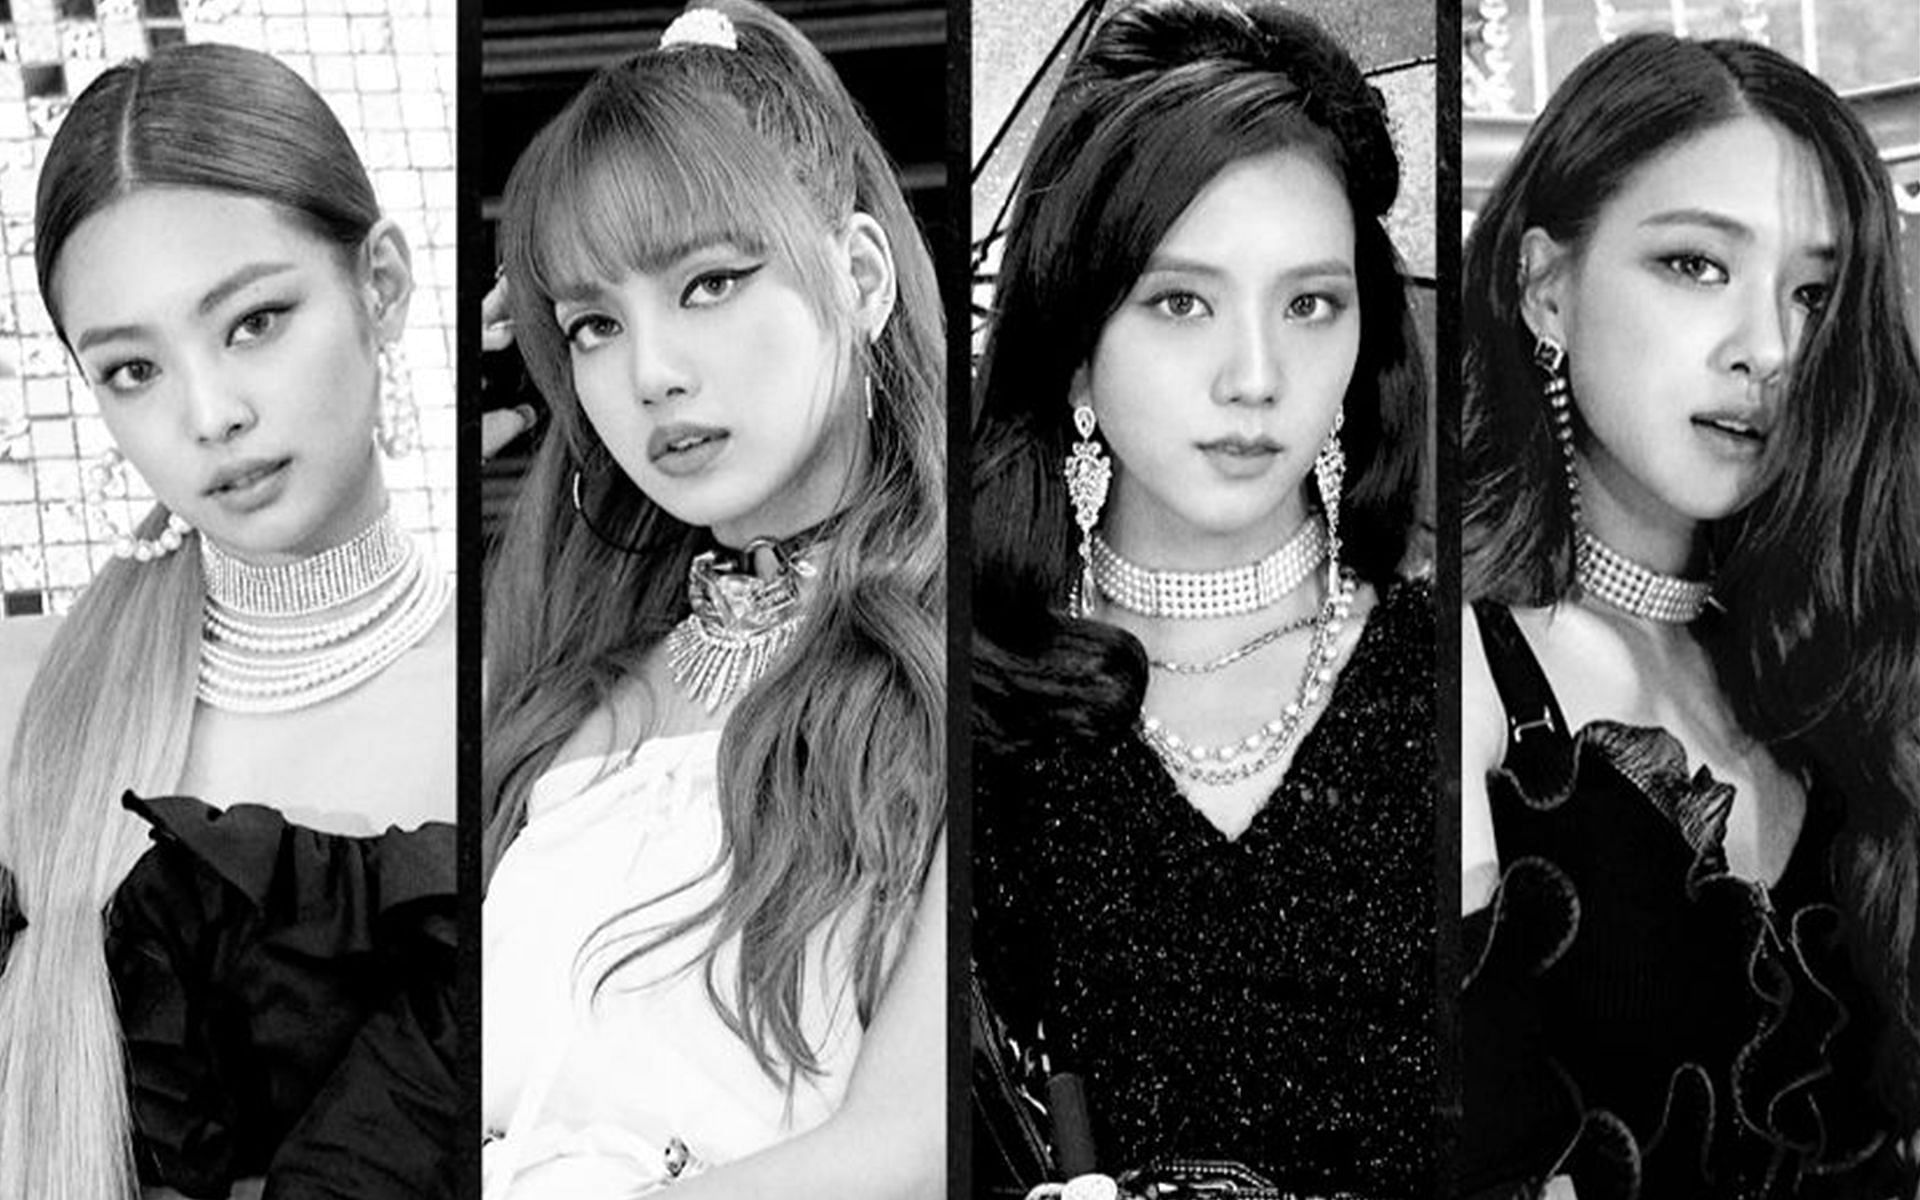 From left to right: Jennie, Lisa, Jisoo, Rose (Image via Twitter@BLACKPINK)